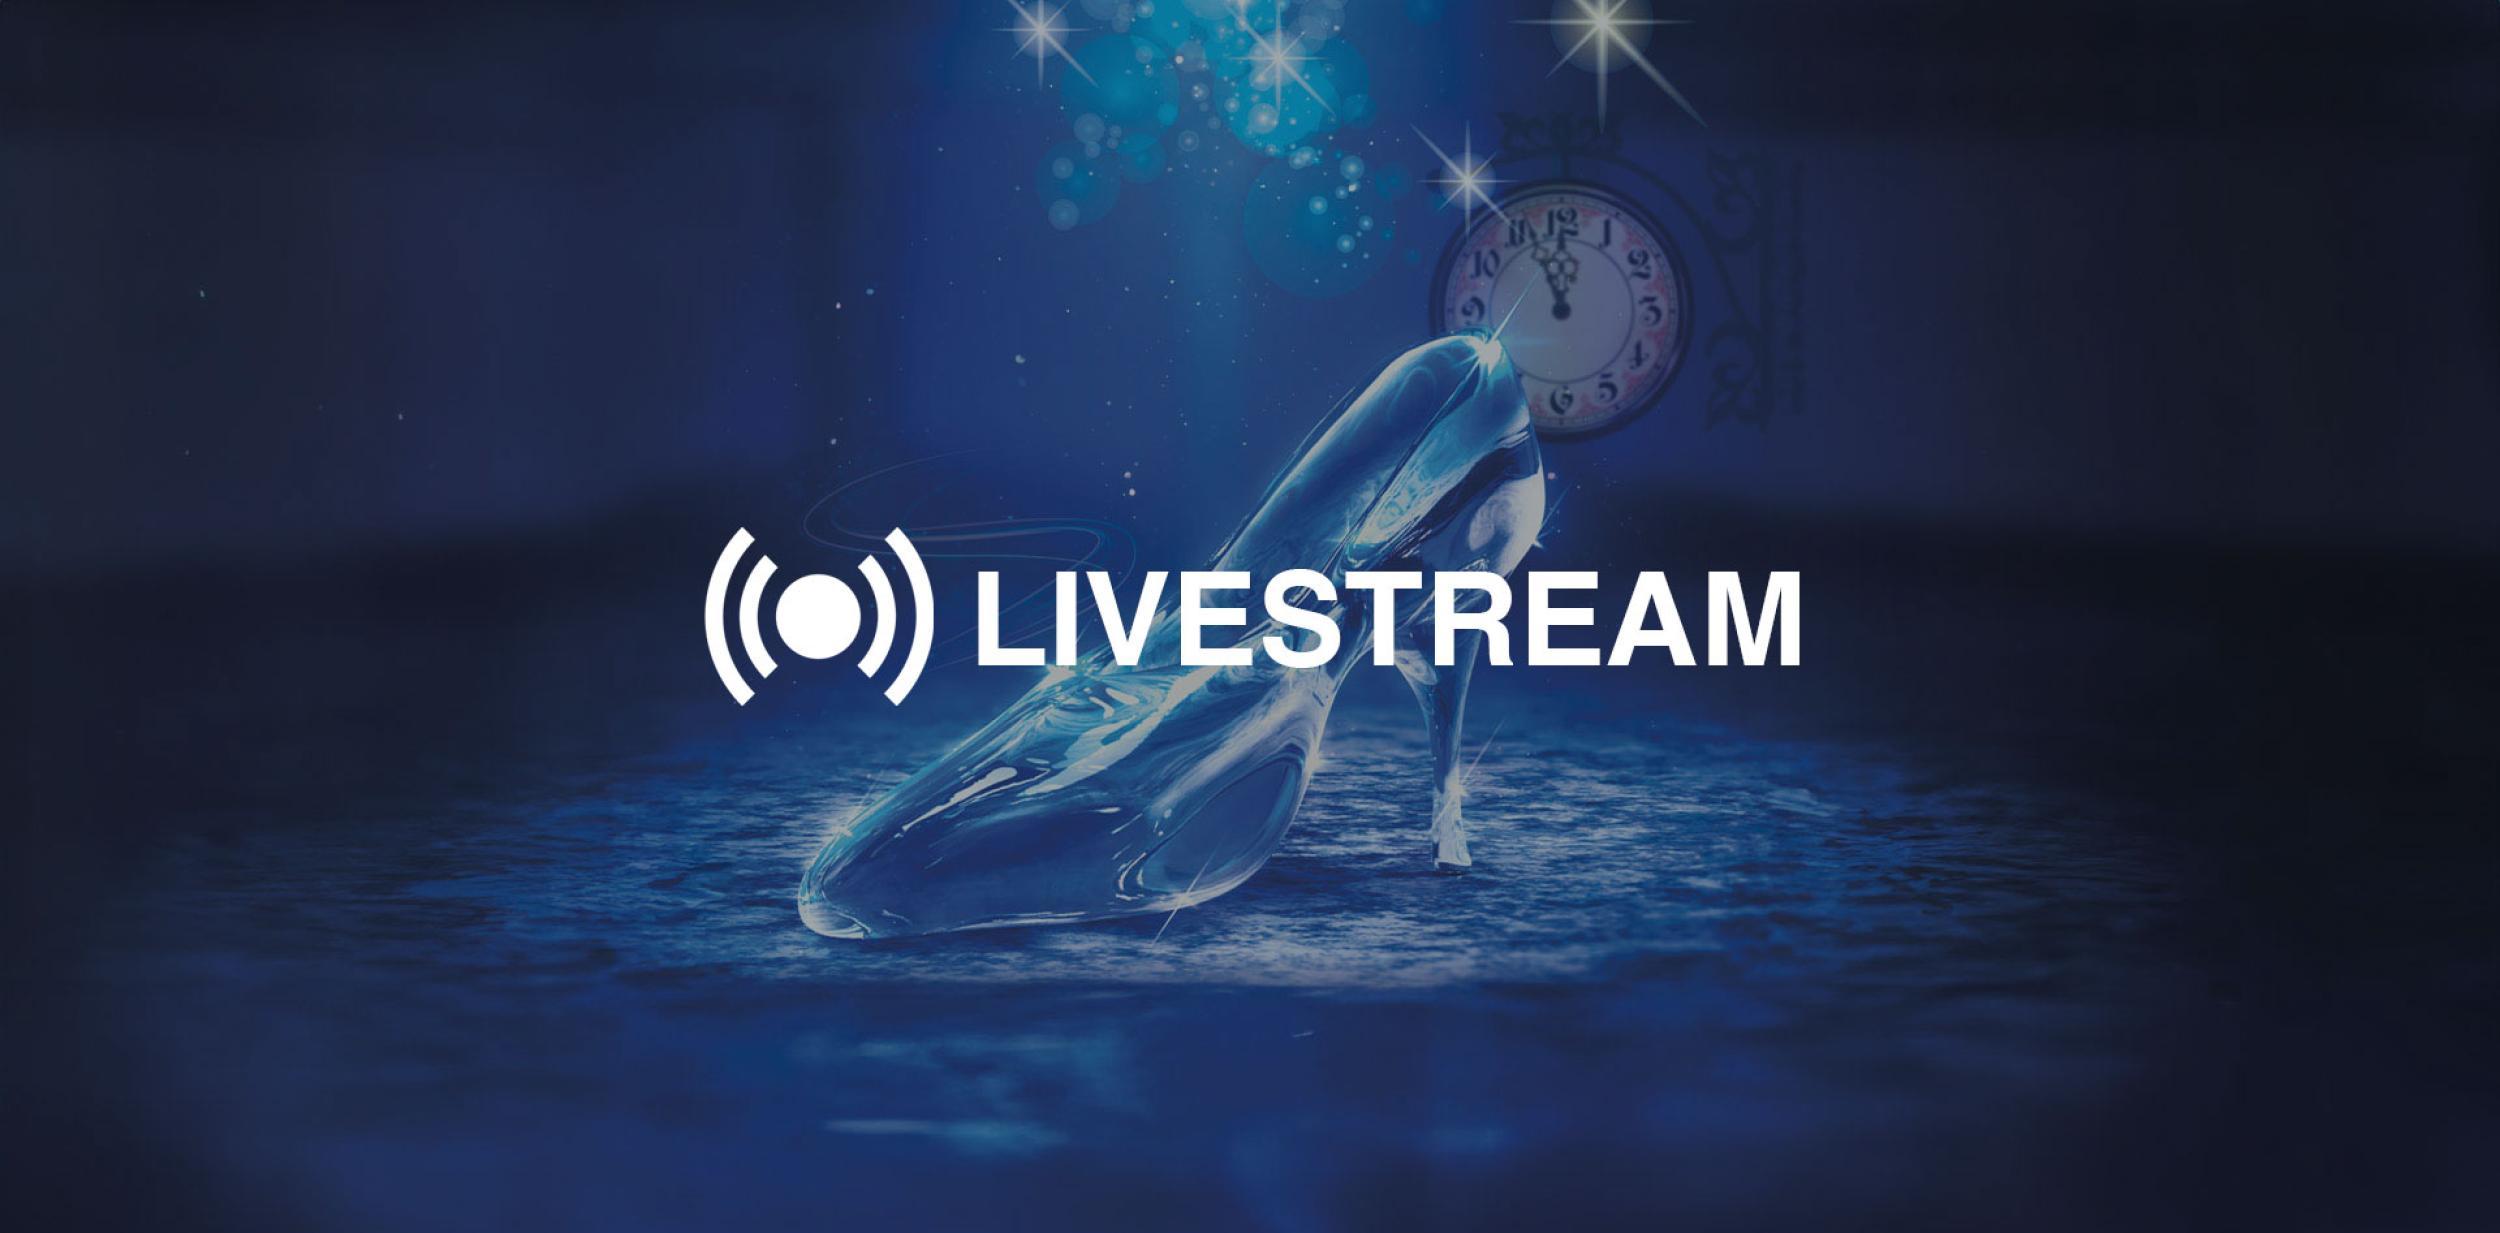 Illustration of glass slipper with 'livestream' text